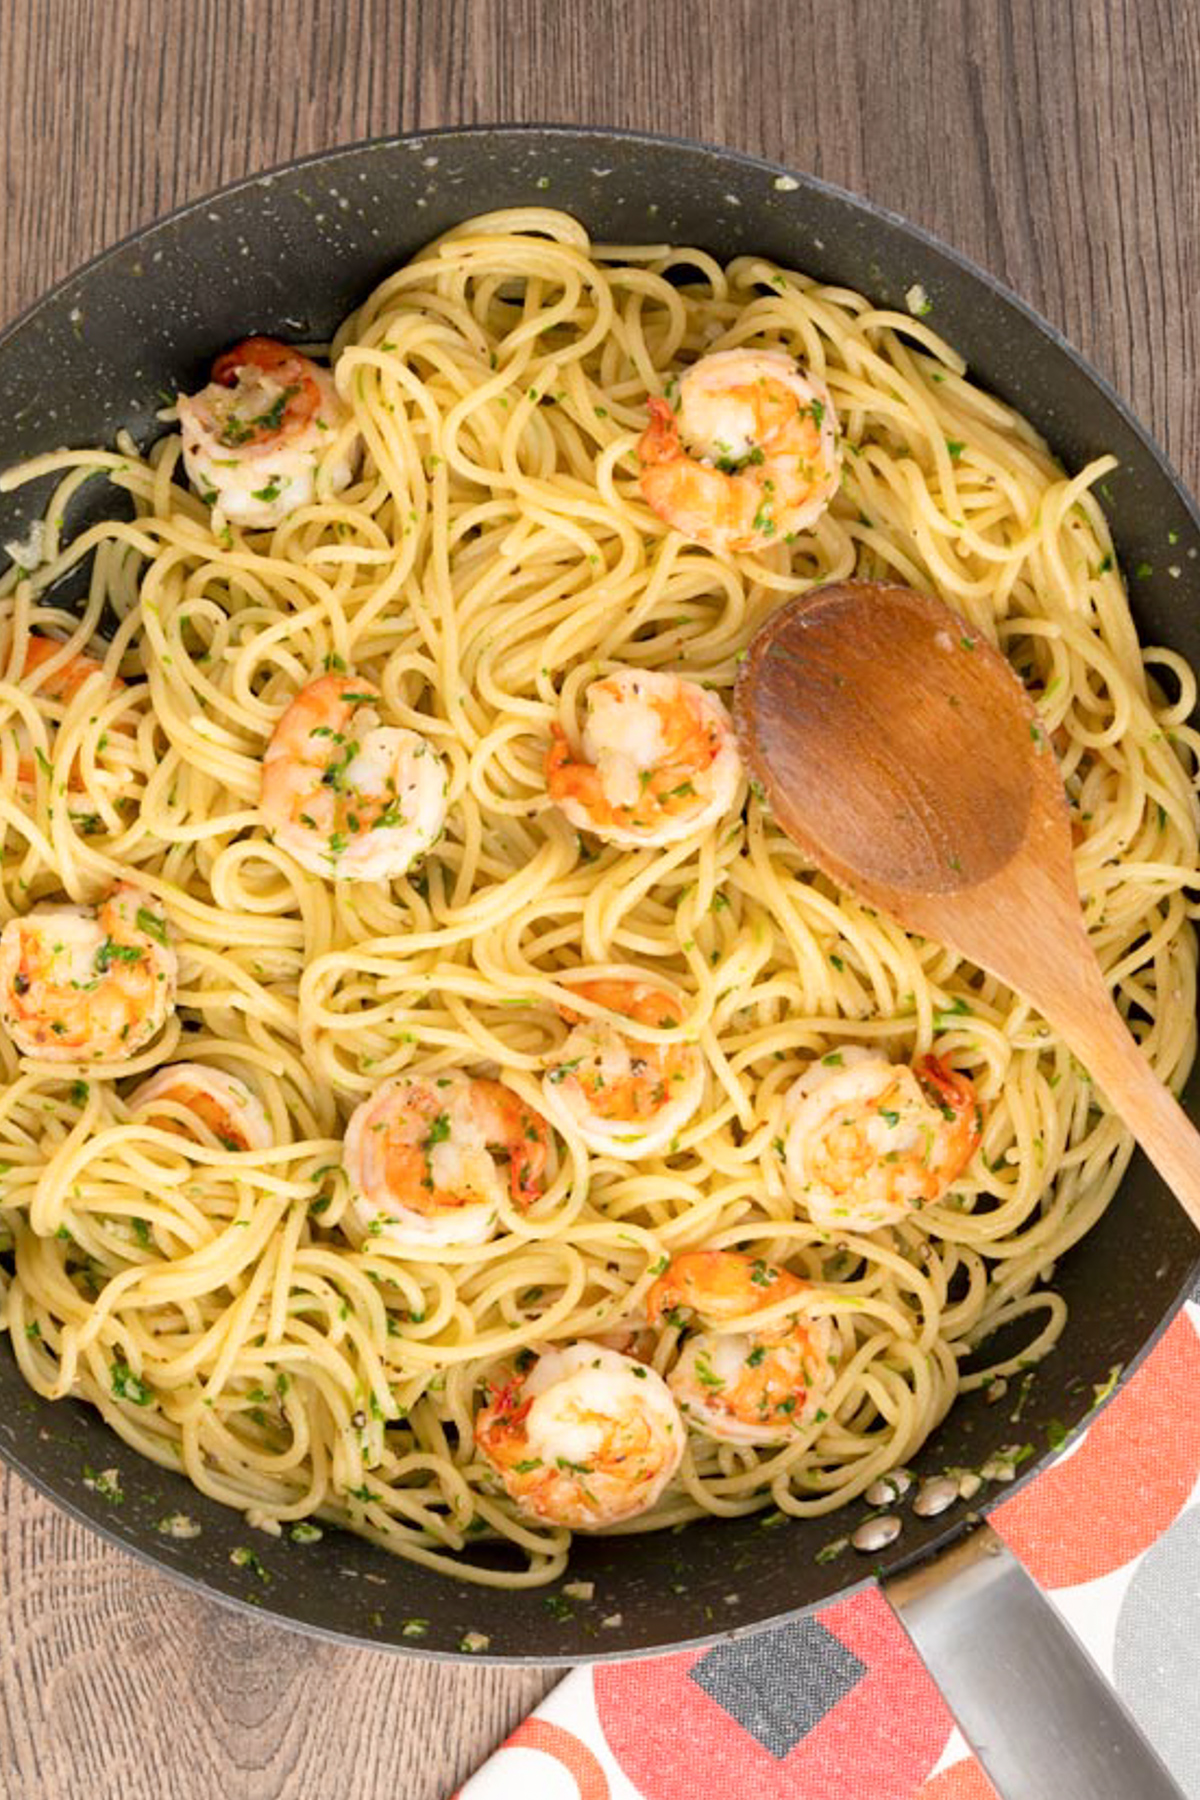 Shrimp pasta in a black pan with a wooden spoon.